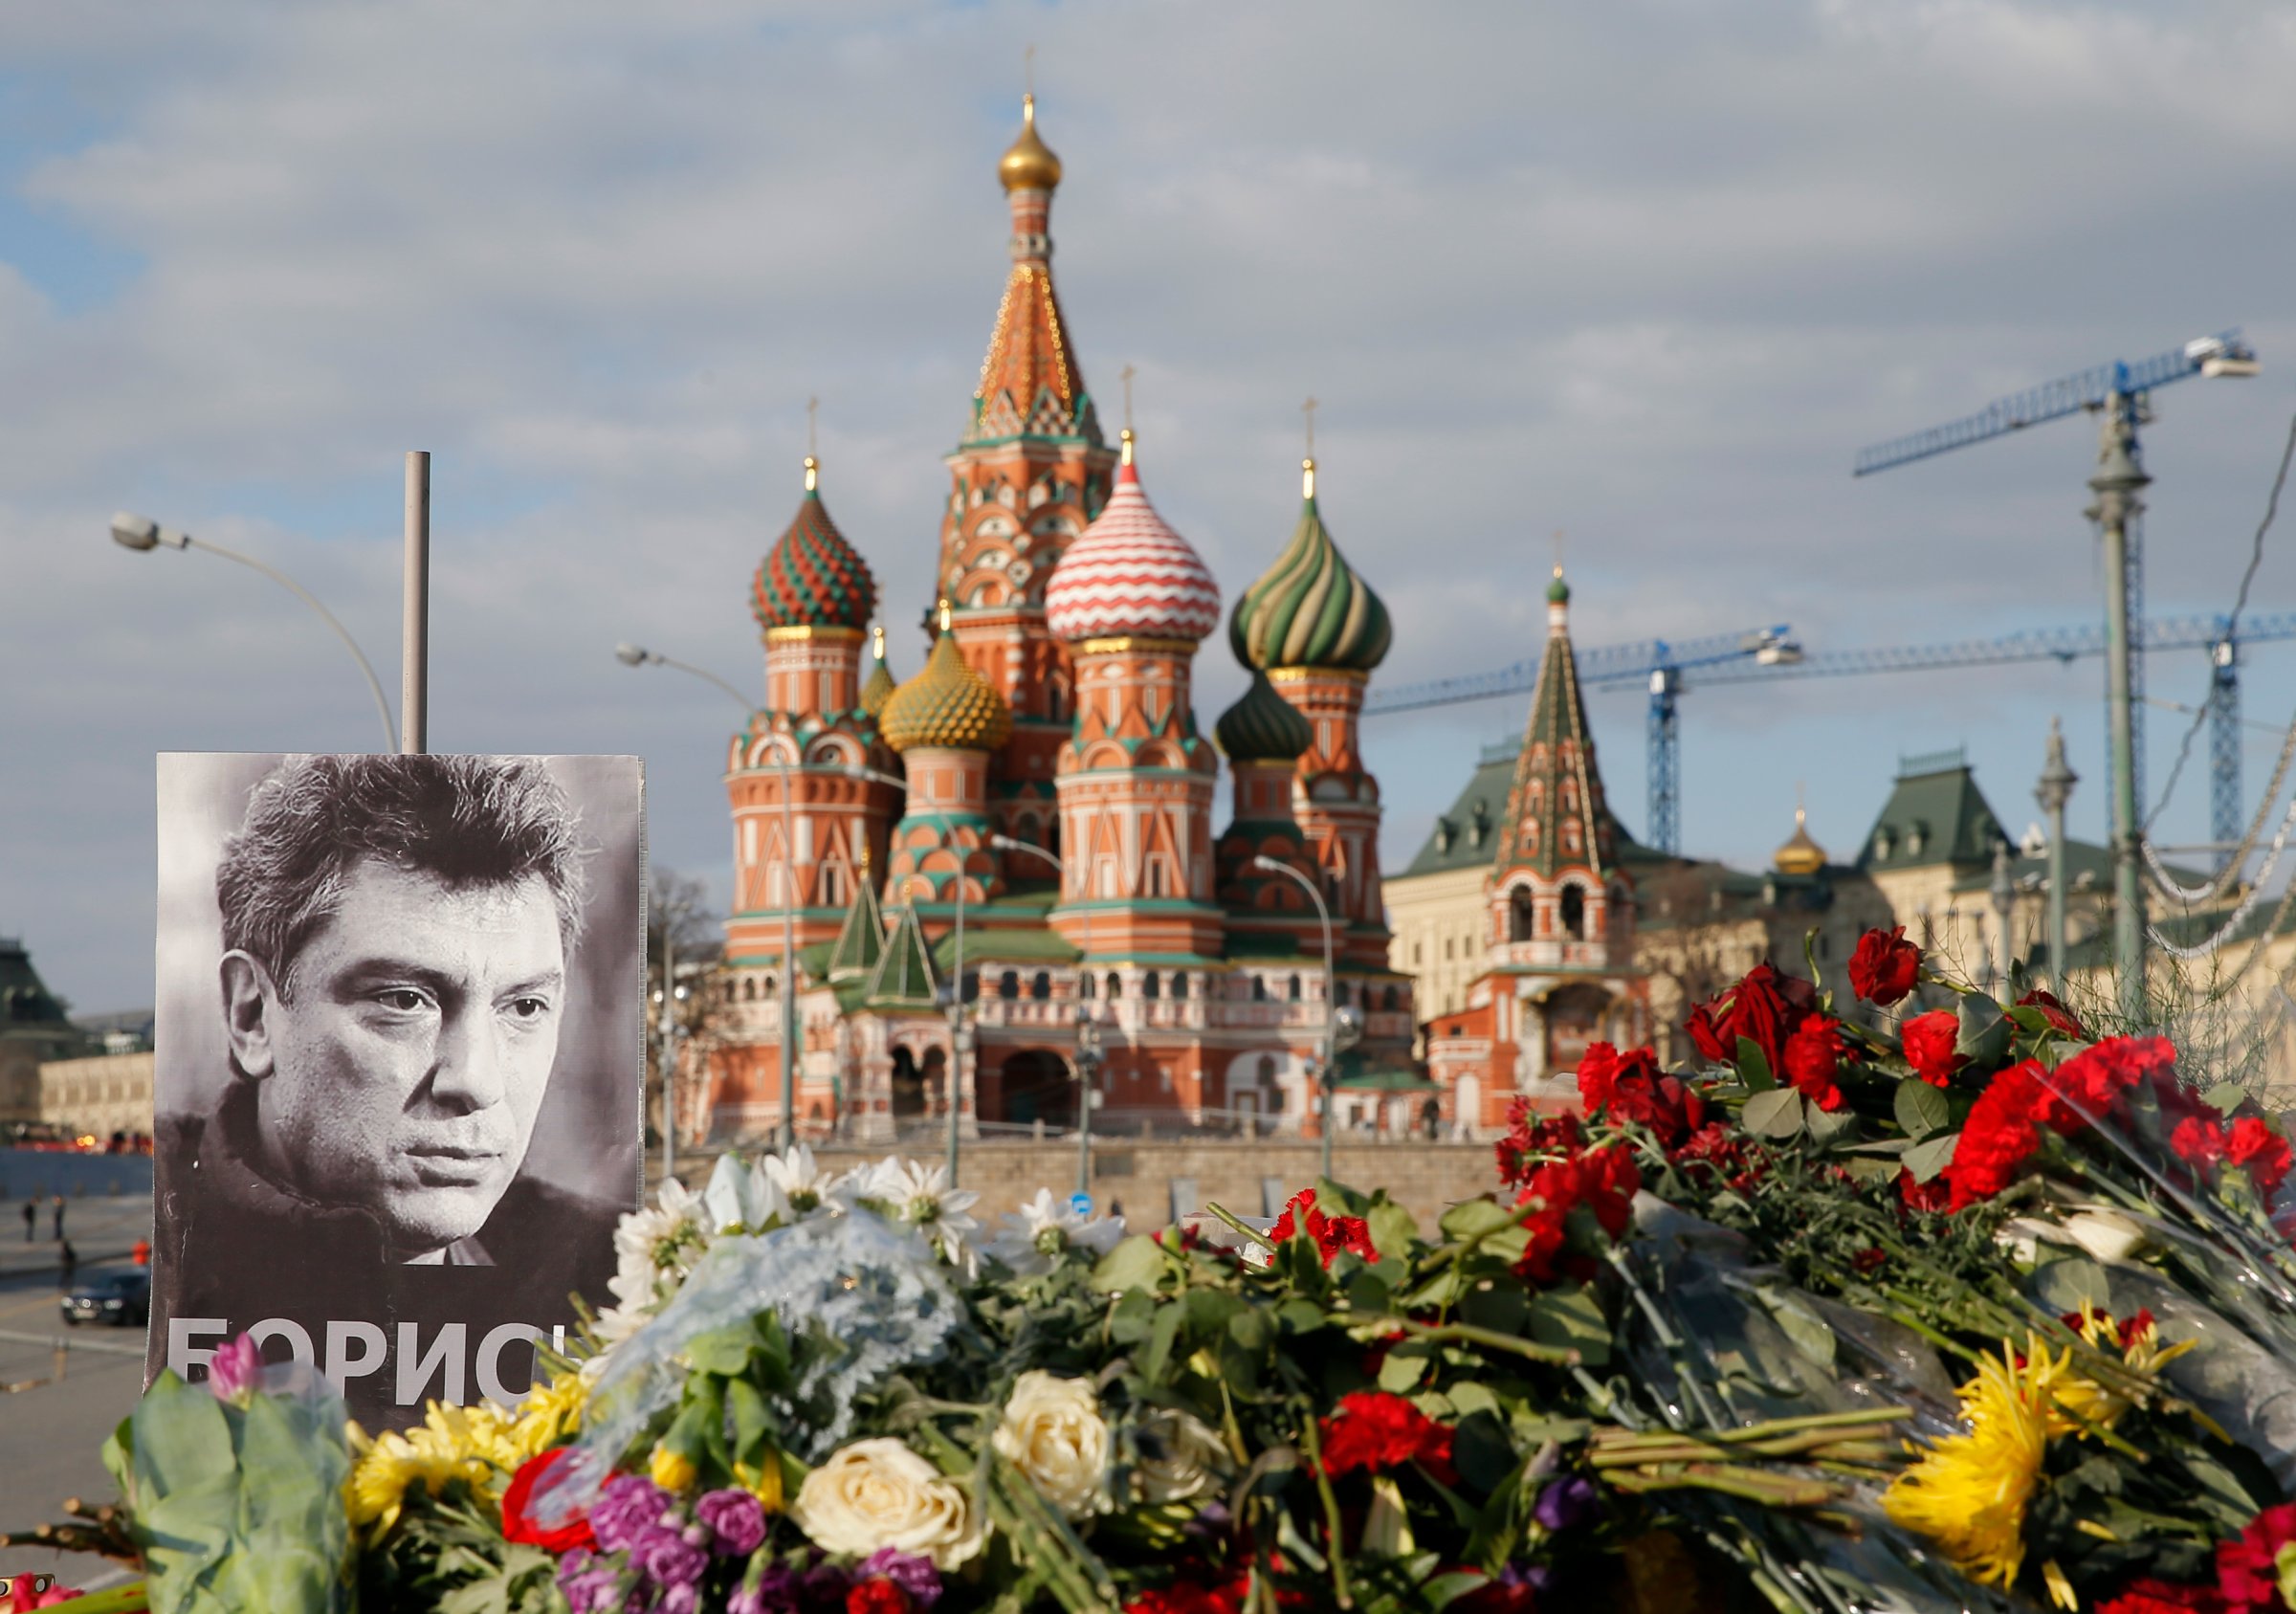 A portrait of Kremlin critic Boris Nemtsov and flowers are pictured at the site where he was killed on Feb. 27, 2015 with St. Basil's Cathedral seen in the background, at the Great Moskvoretsky Bridge in central Moscow on March 6, 2015.